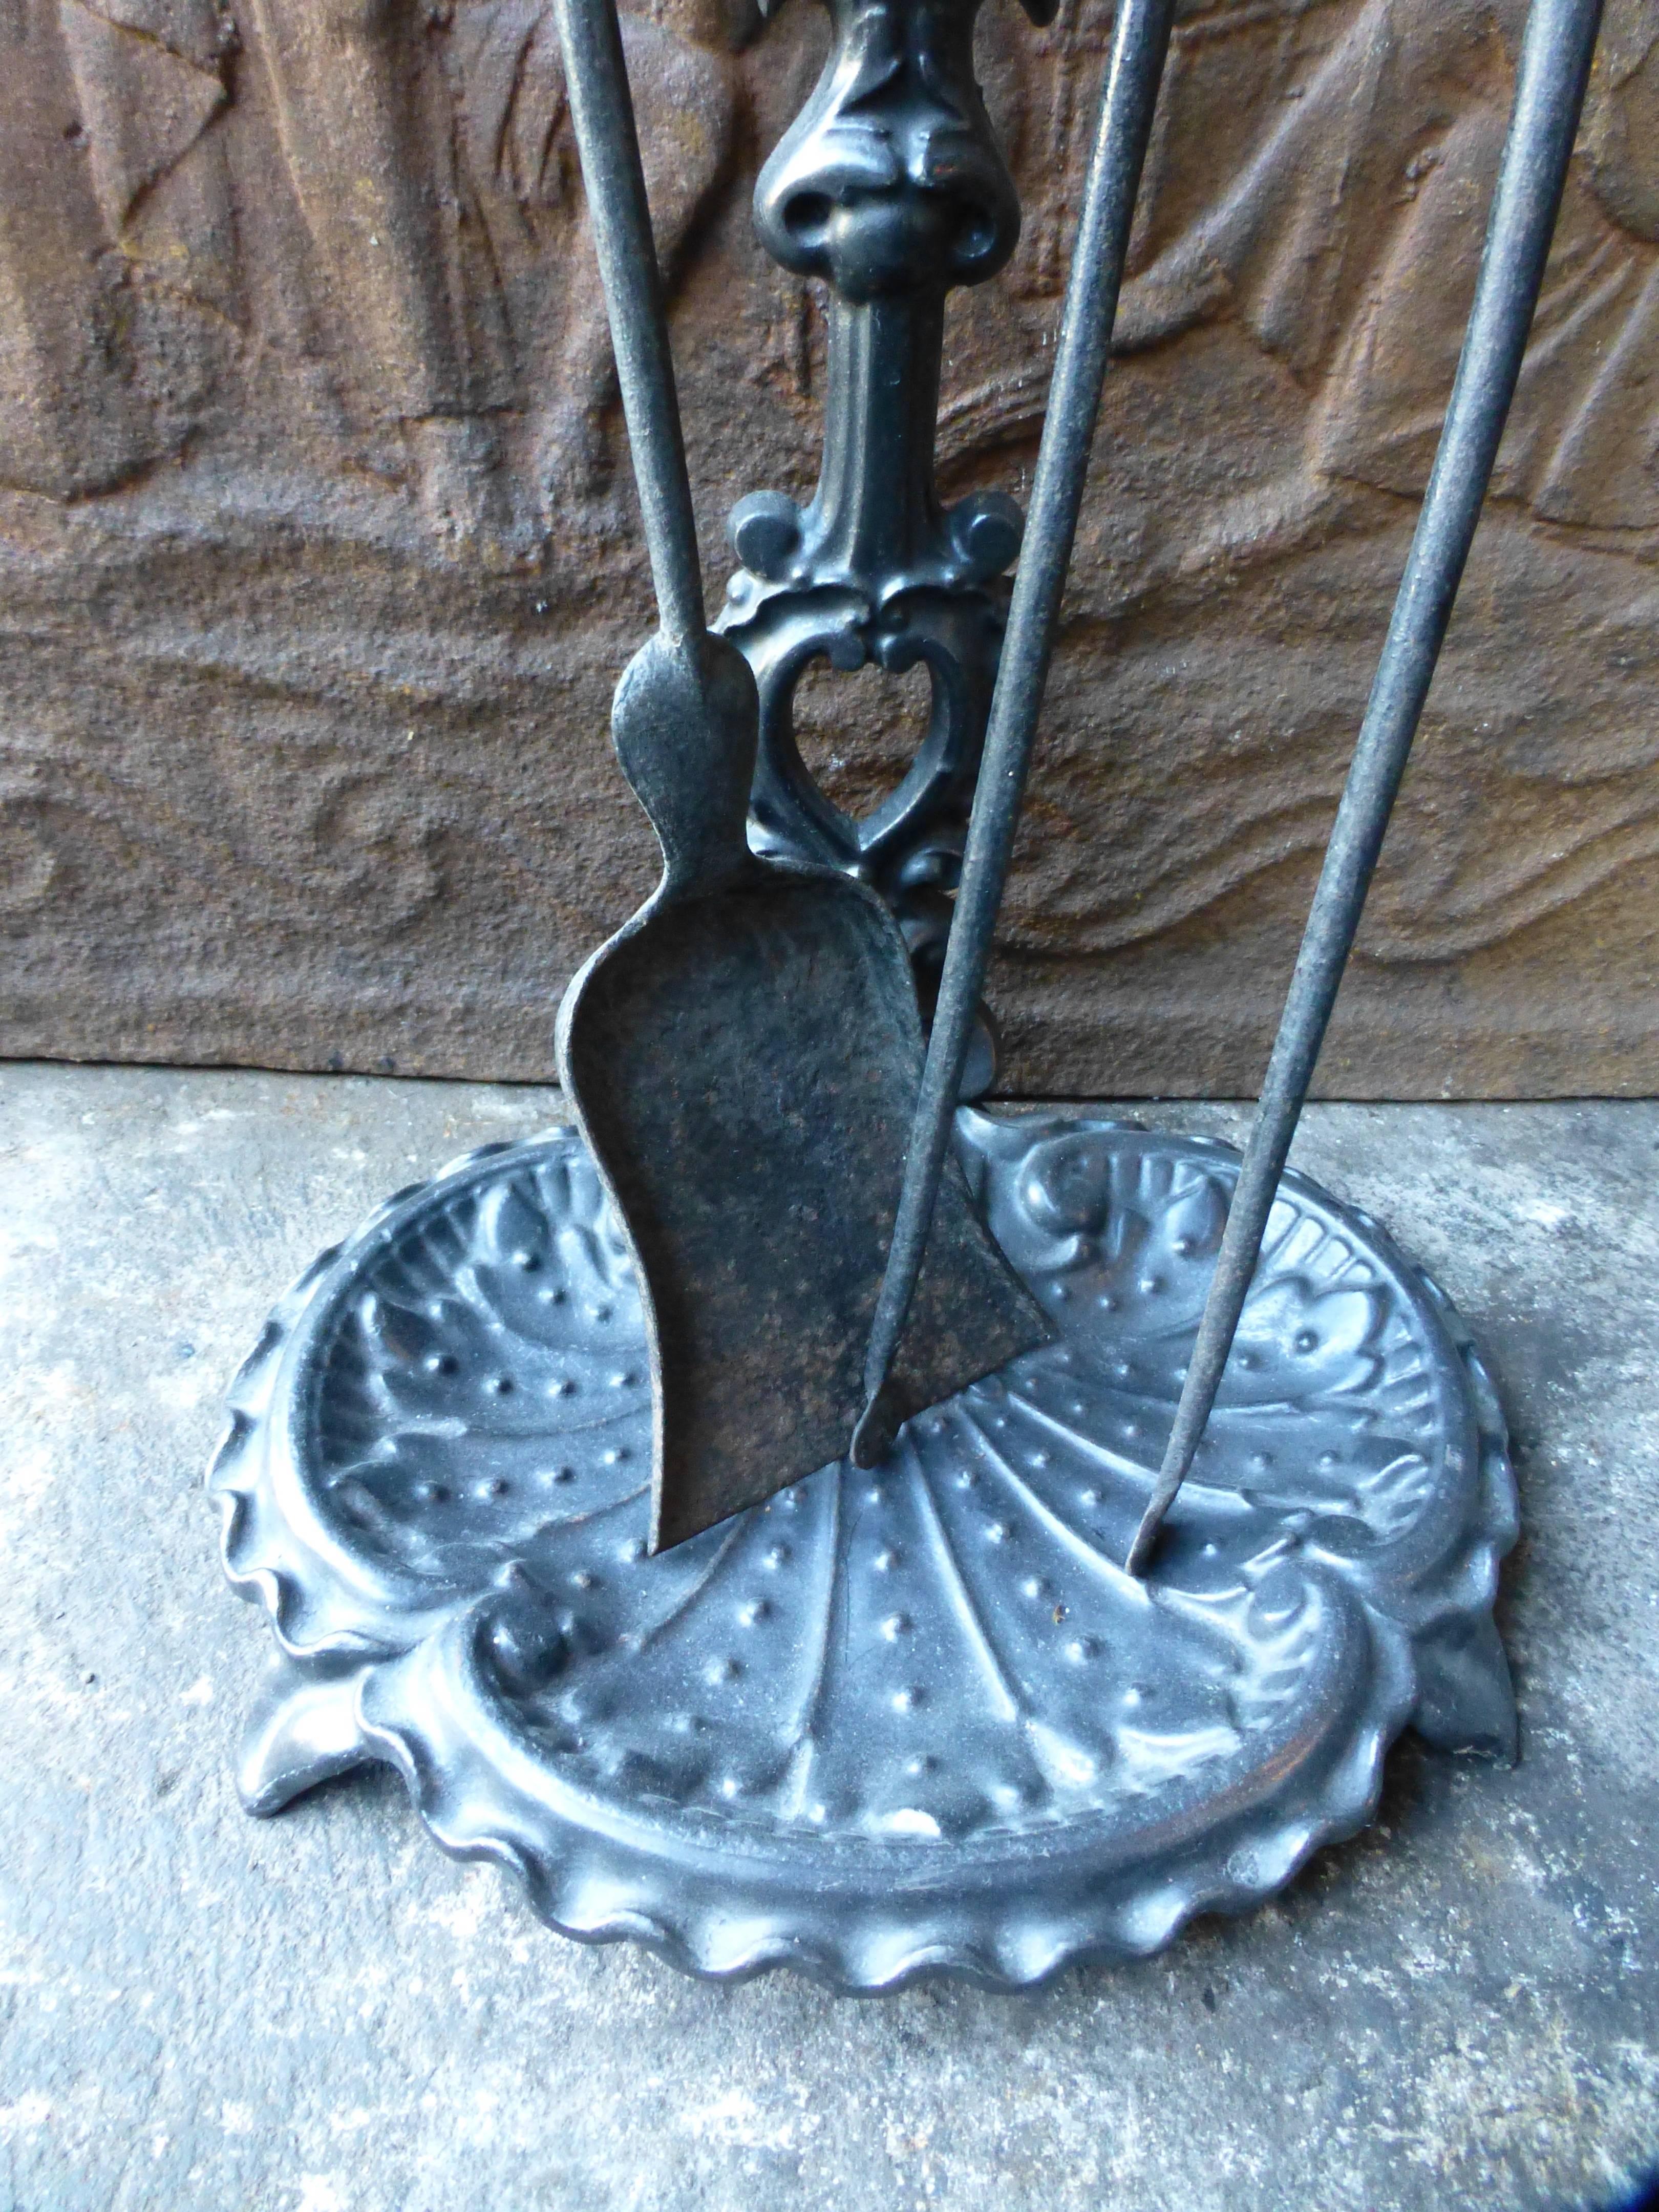 Forged Antique Fireplace Tools, Fire Irons